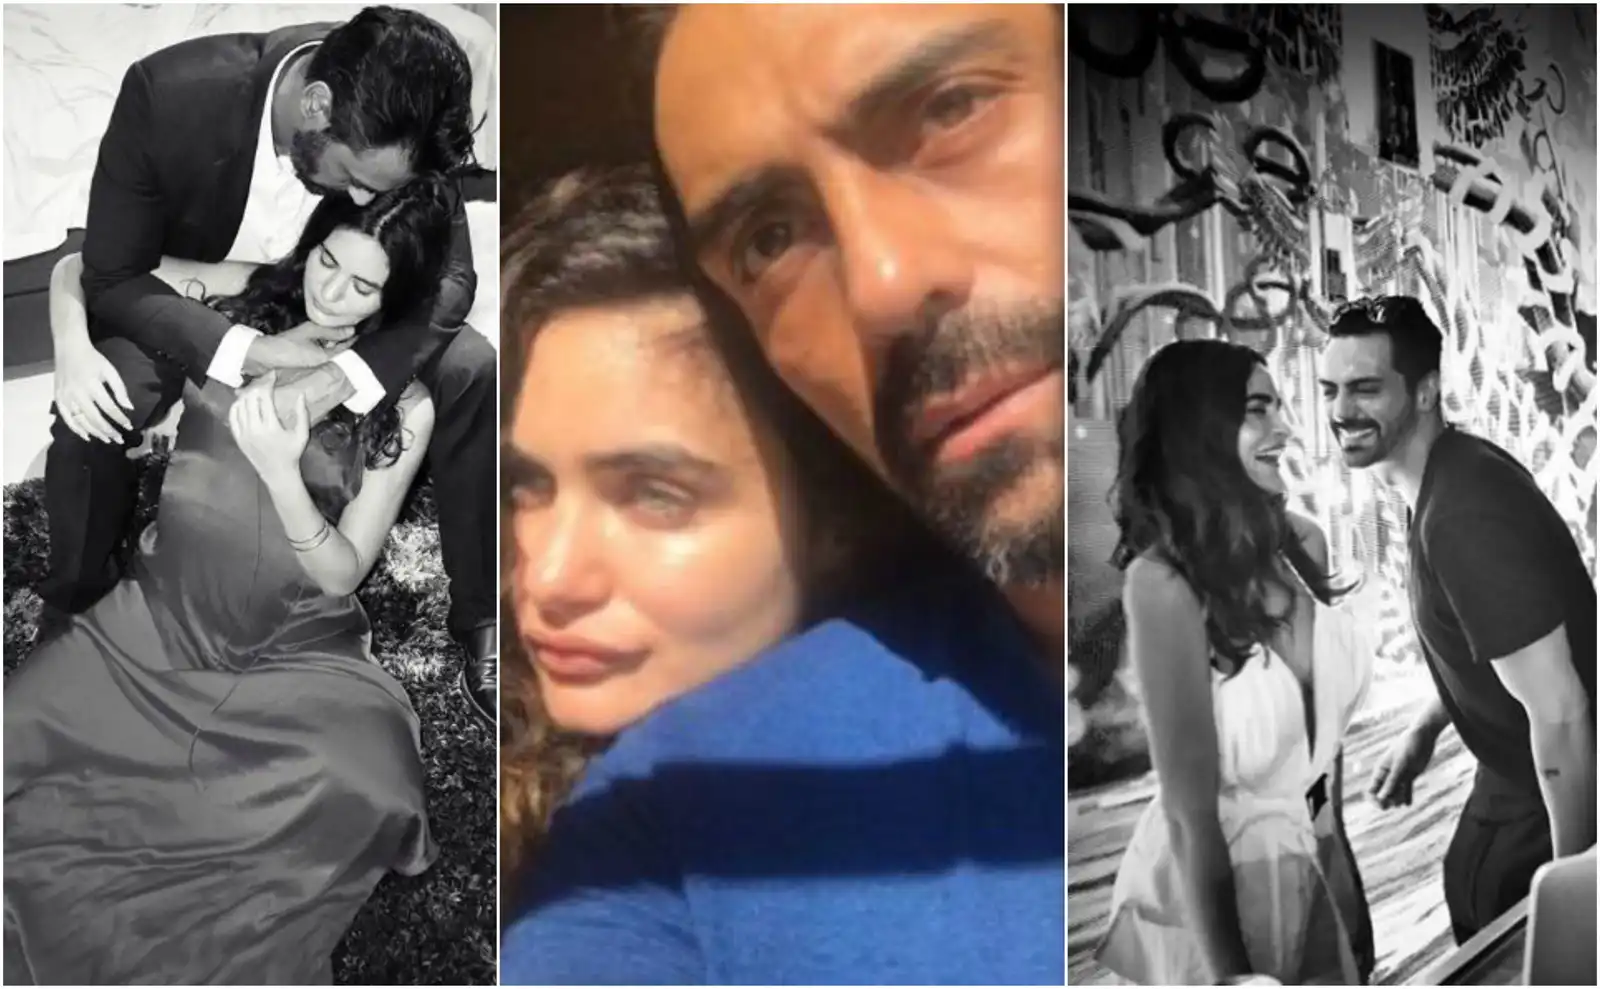 In Pictures: Arjun Rampal And Gabriella Demetriades' Love Story Will Make You Believe In Second Chances